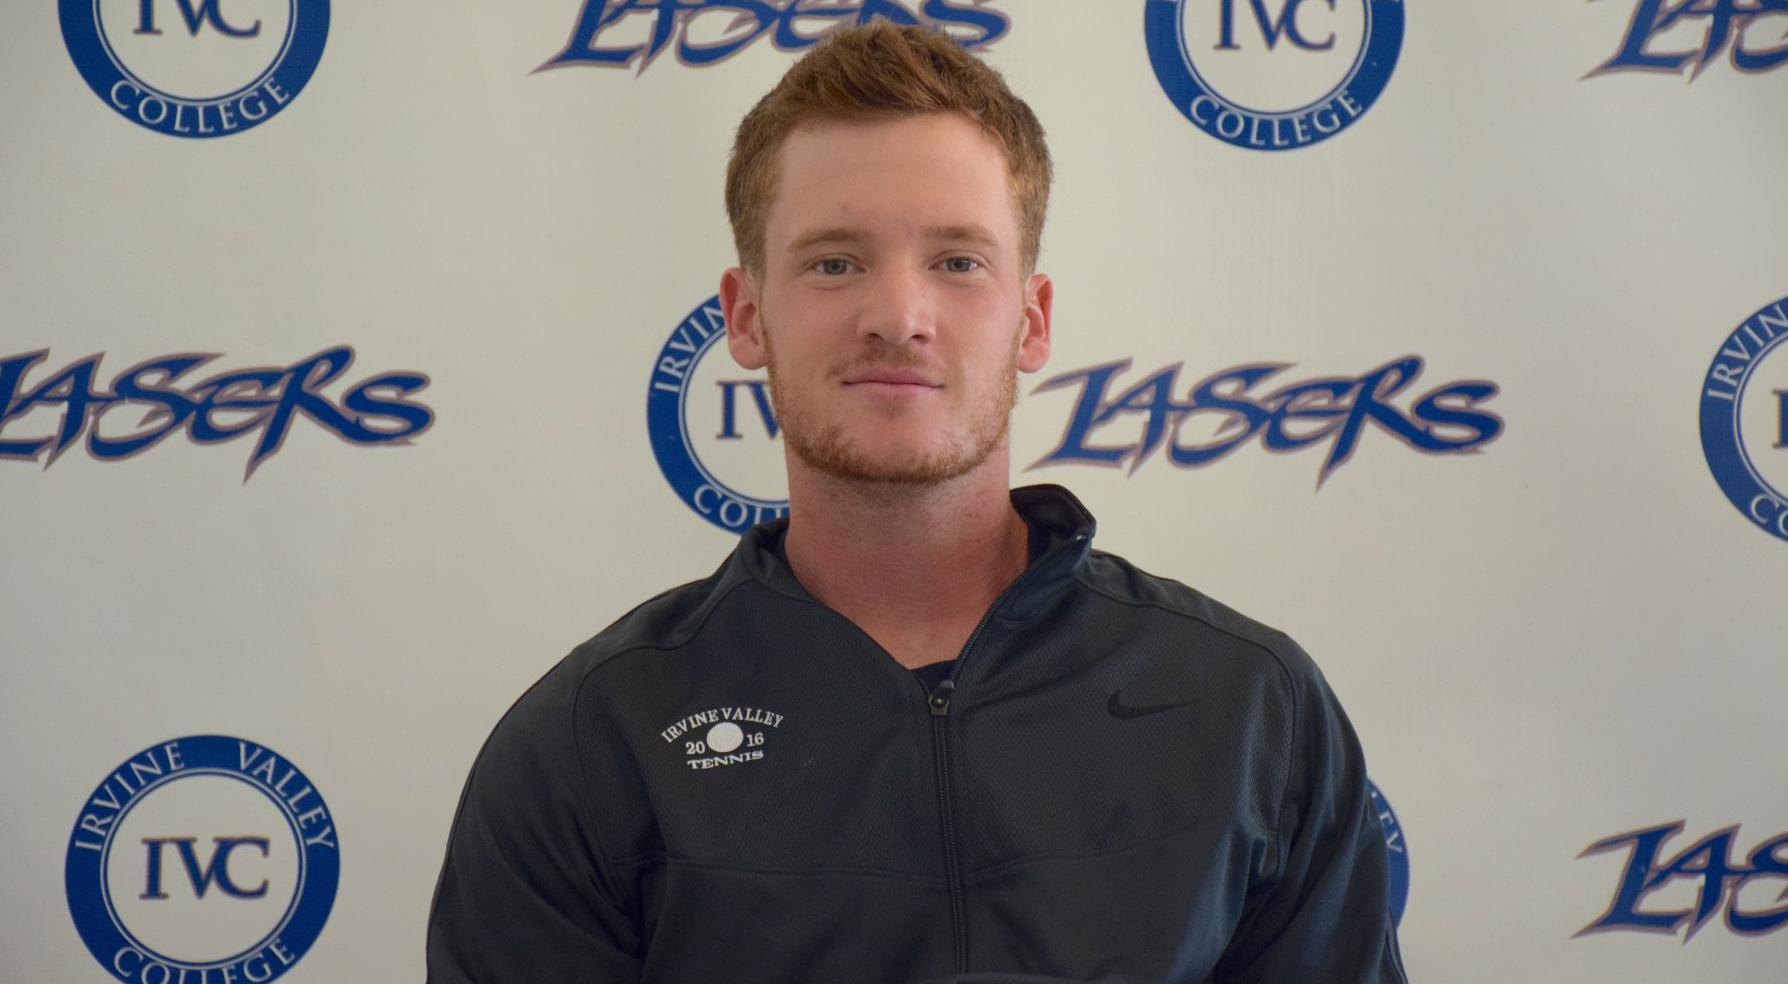 Sam Cohen selected as the OEC men's tennis player of the year